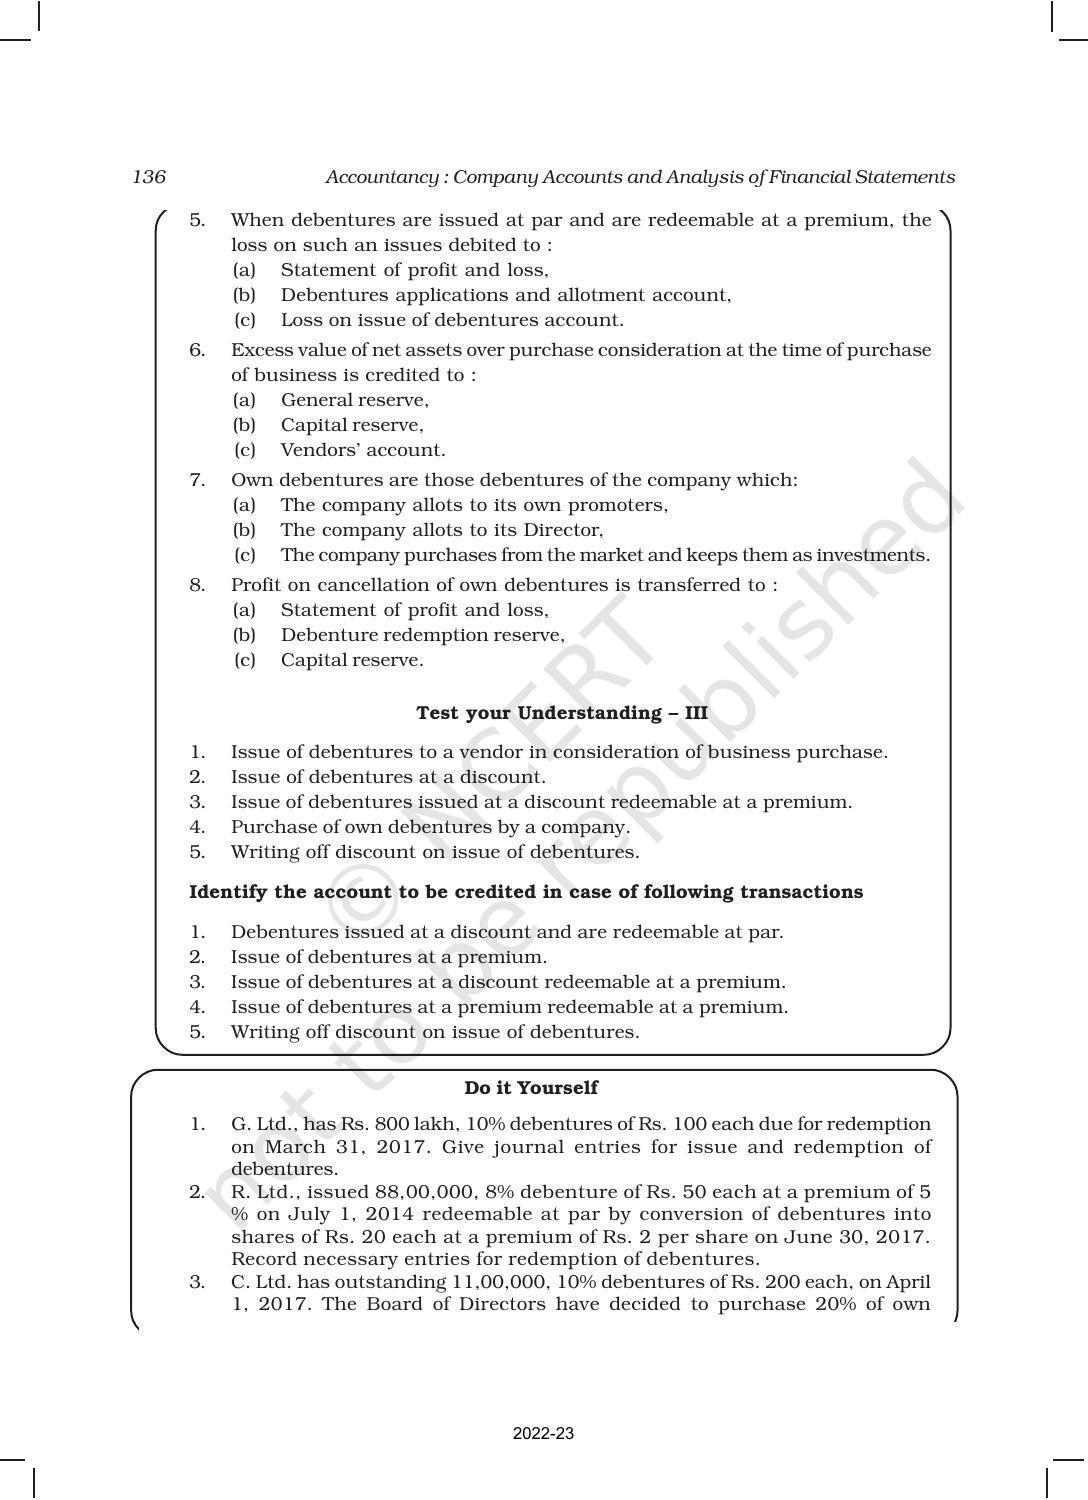 NCERT Book for Class 12 Accountancy Part II Chapter 1 Issue and Redemption of Debentures - Page 62